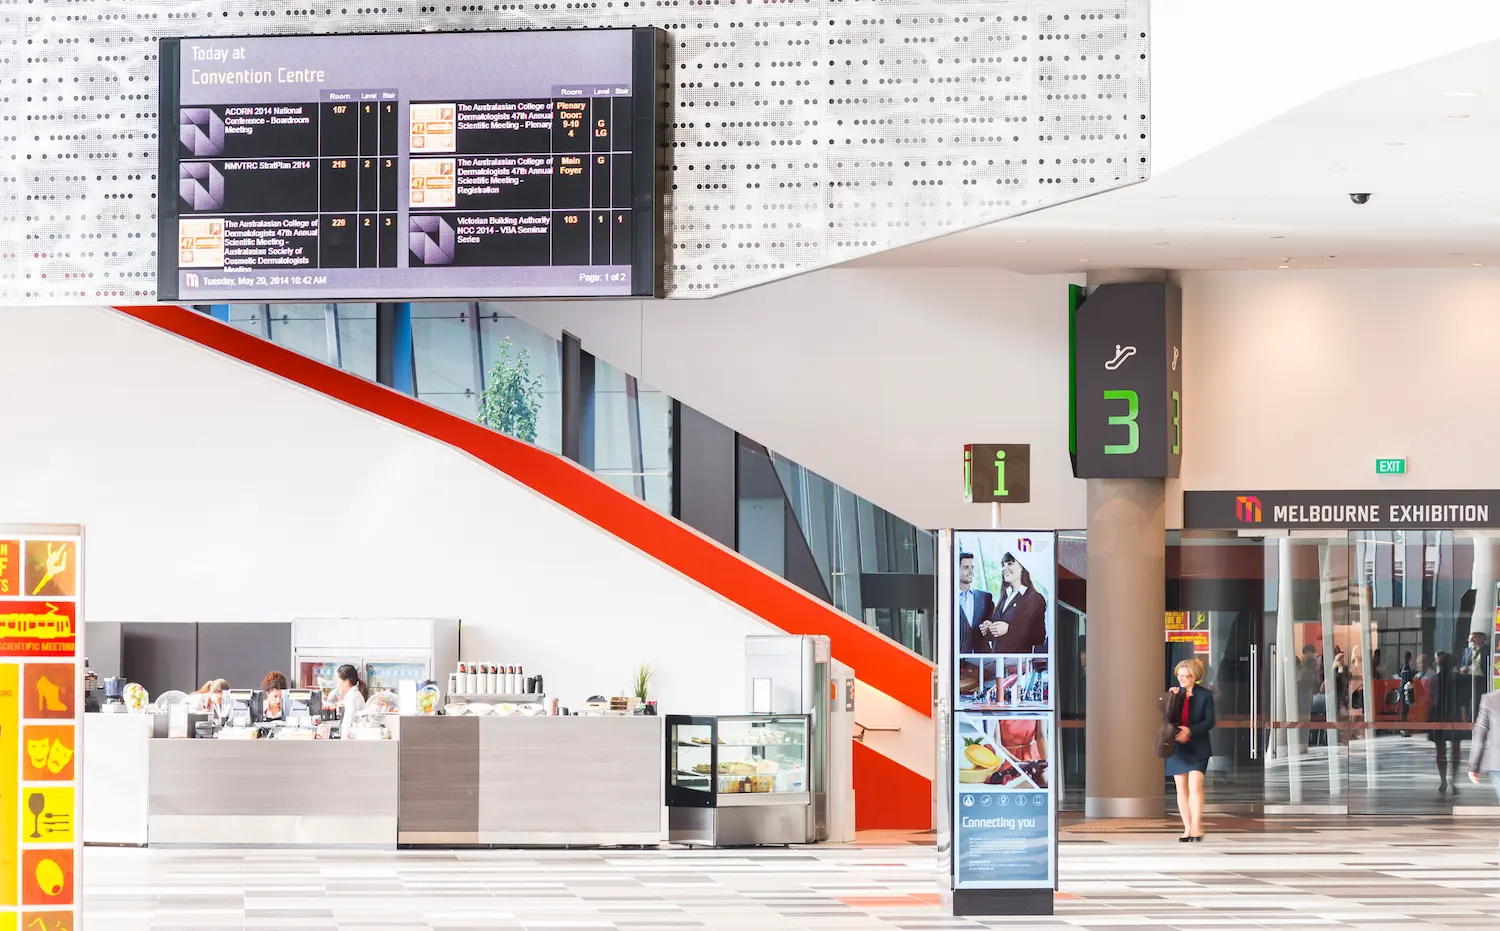 A new type of smart digital signage